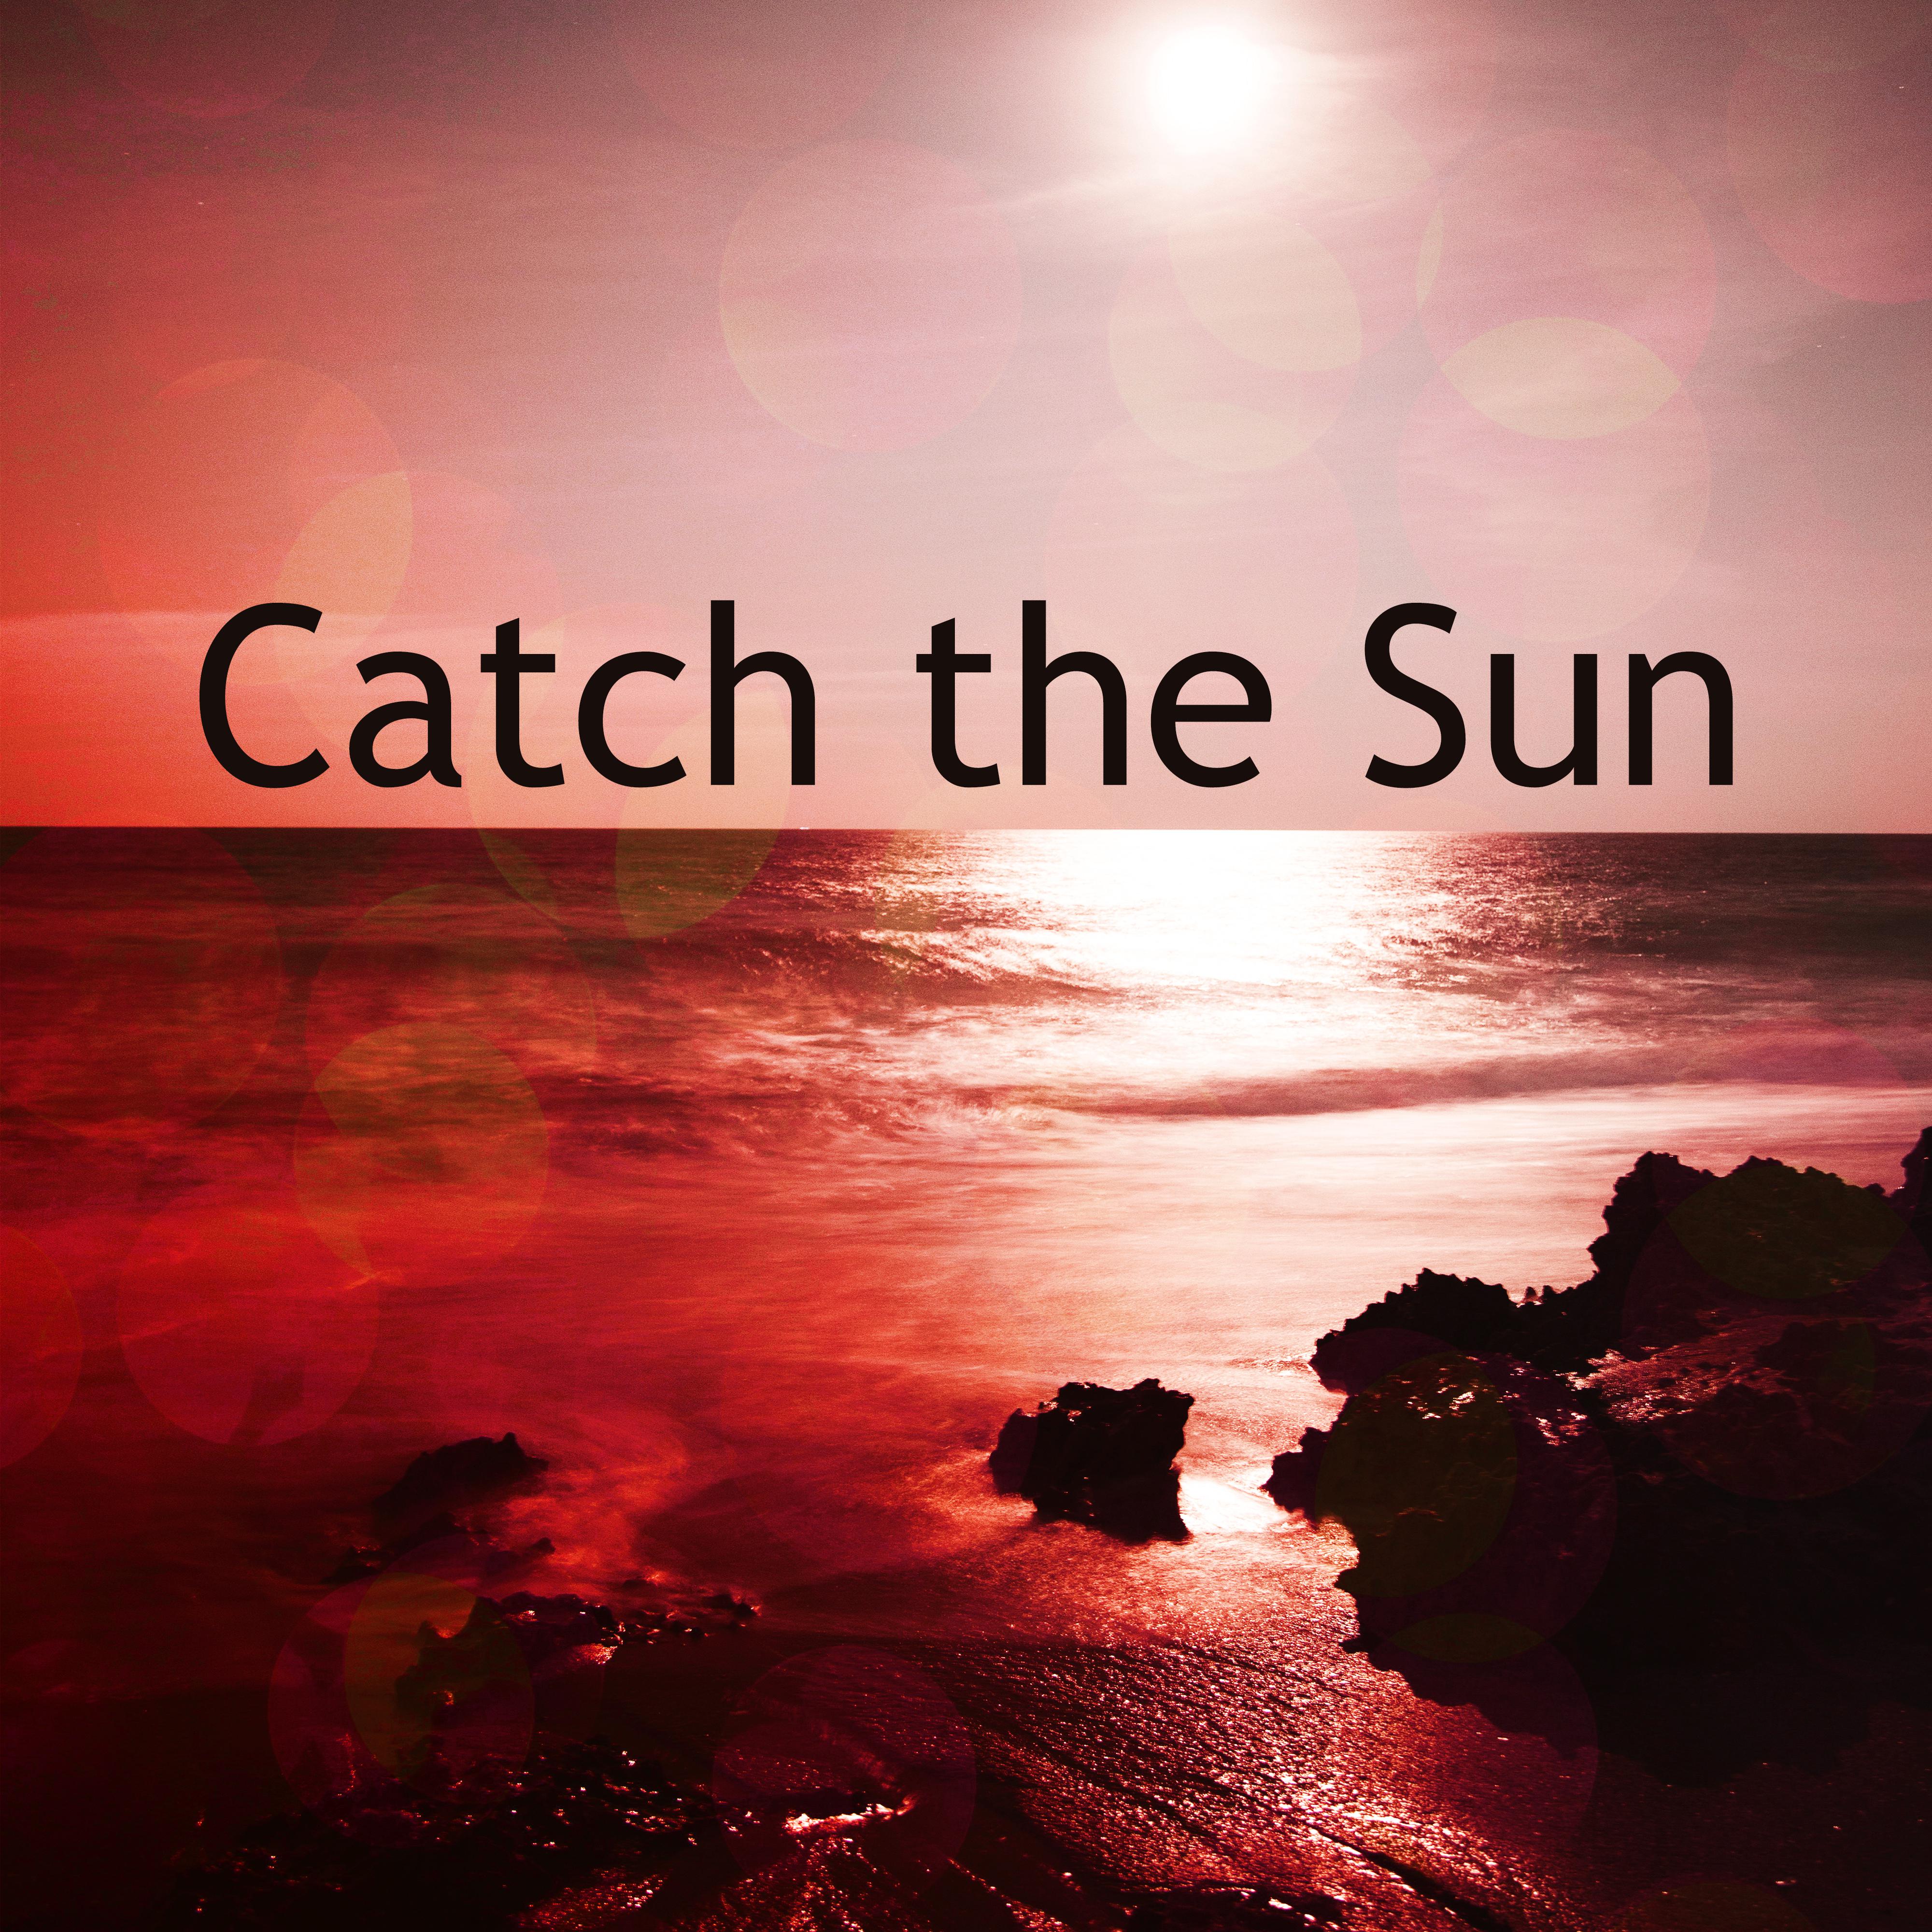 Catch the Sun – Chillout Music, Summertime, Holiday Songs, Sunrise, Beach Chill, Ibiza Lounge, Time to Relax